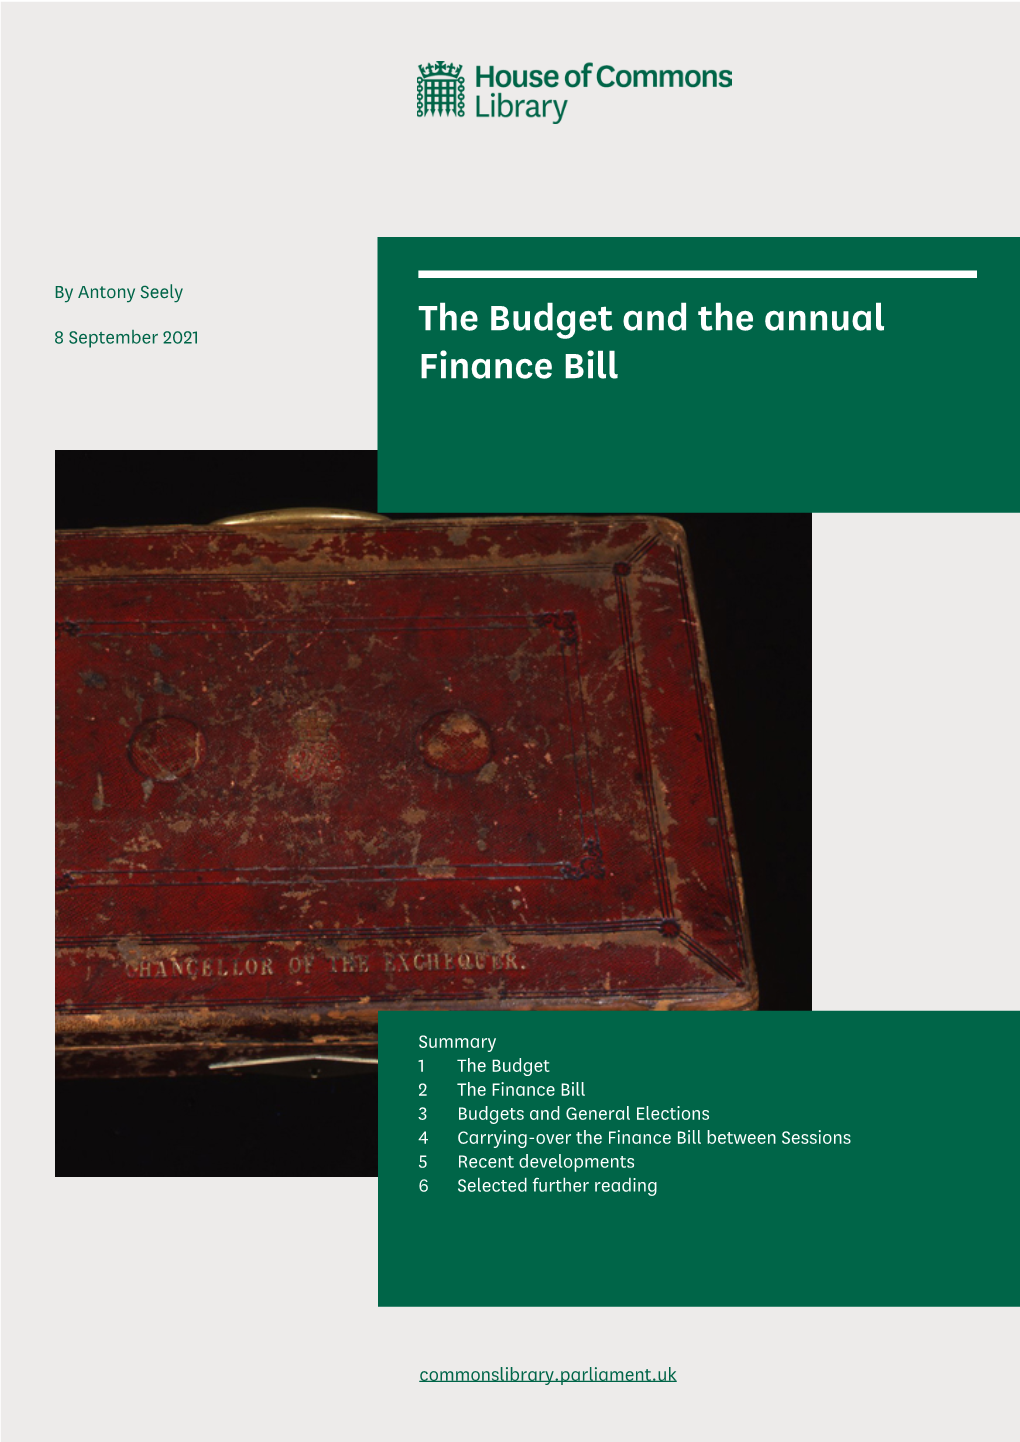 The Budget and the Annual Finance Bill